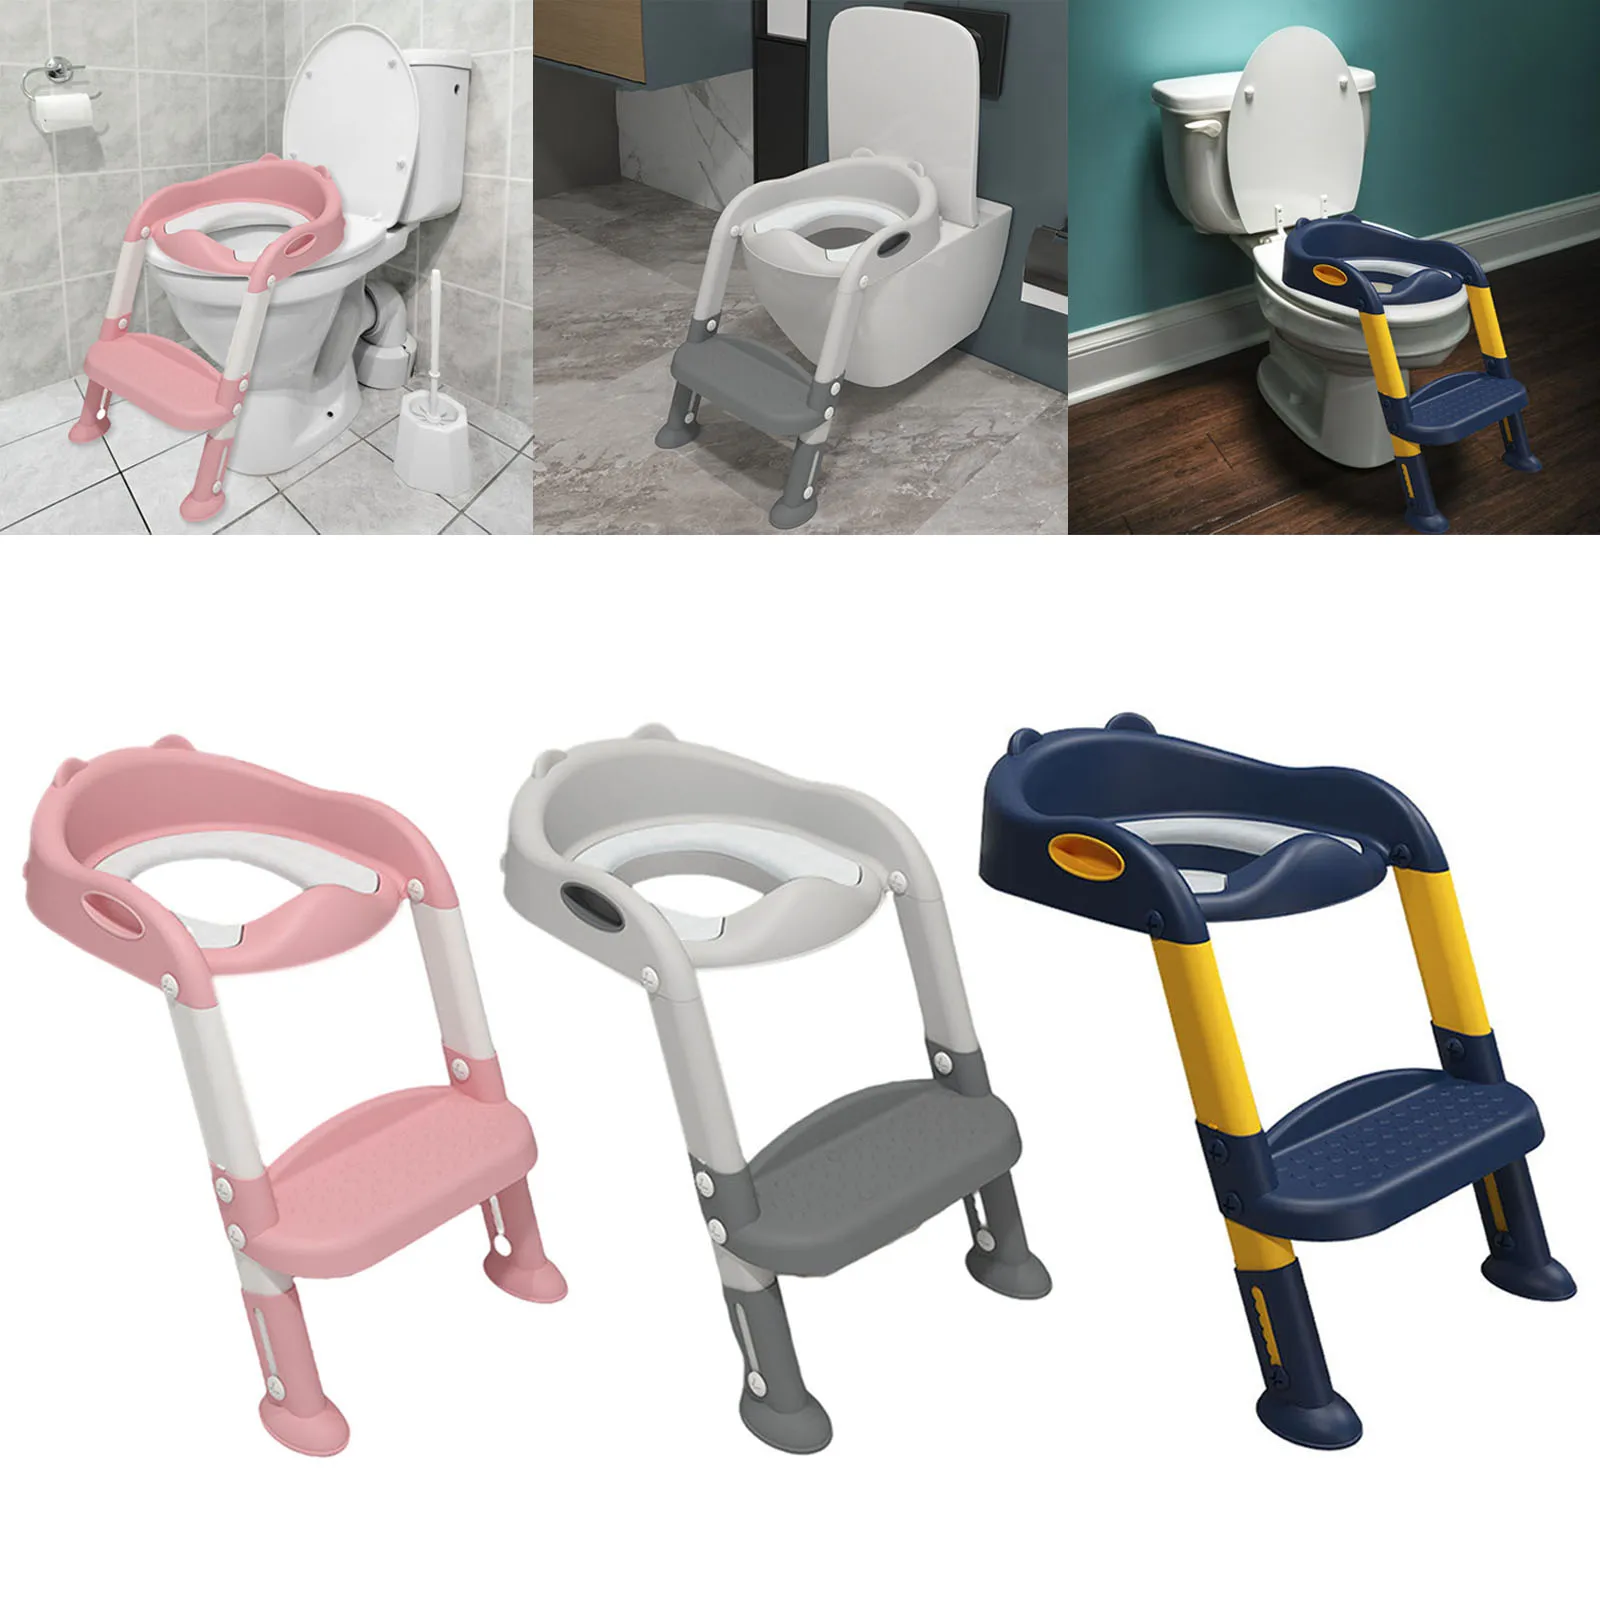 KKCD Camp Chair Folding Stool Baby Toilet Seat Childrens Pedal Adjustable Child Toilet Ladder Chair Toilet Plastic Stool Folding Step Stool color : A 